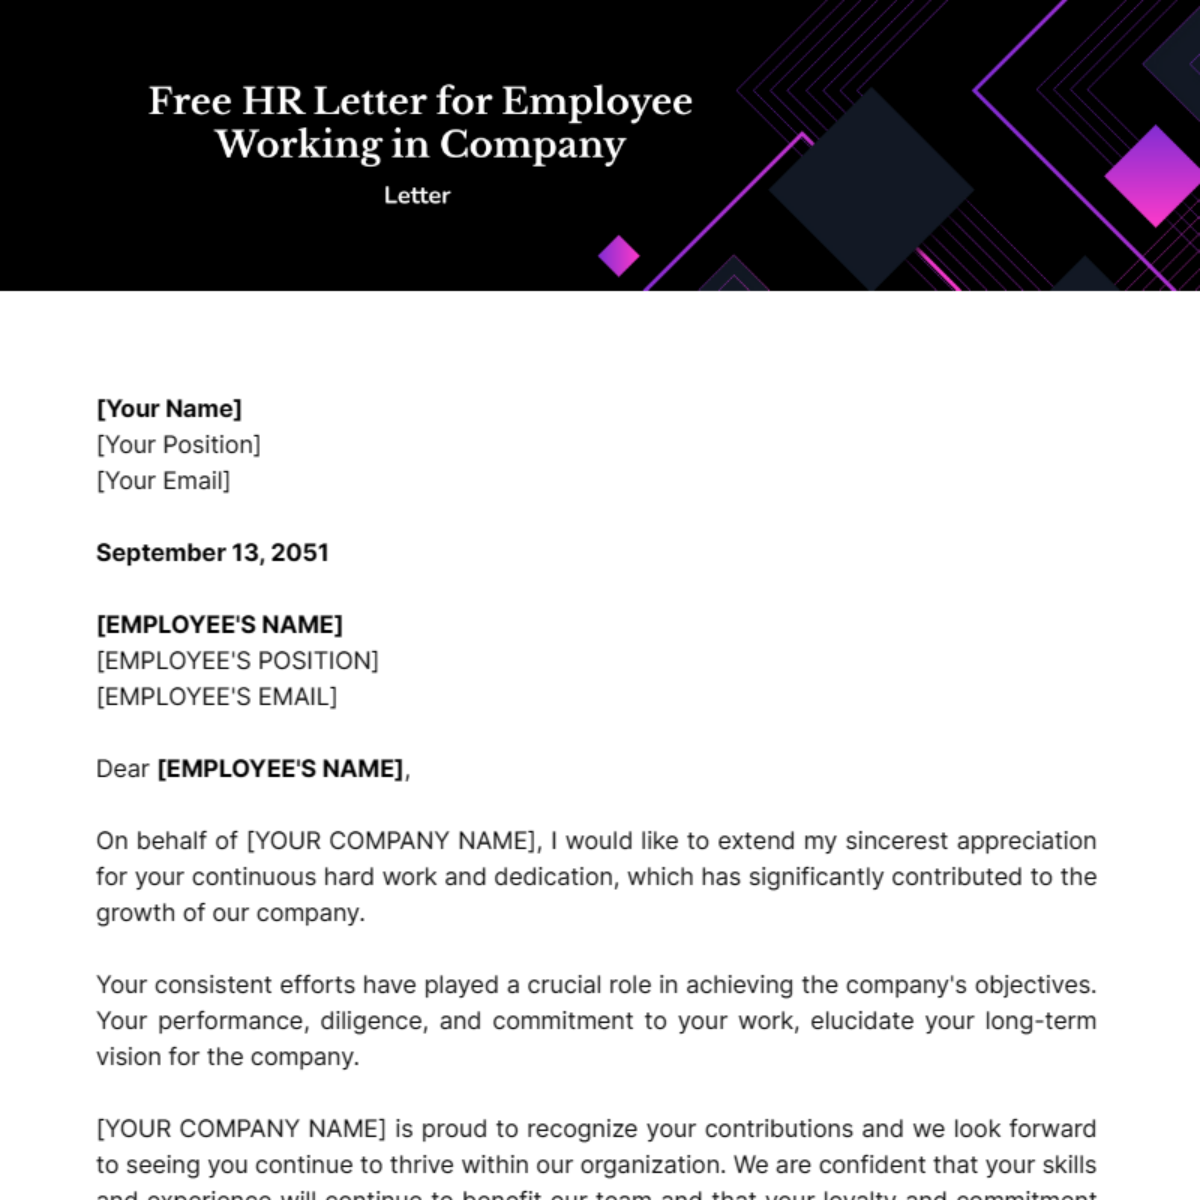 HR Letter for Employee Working in Company Template